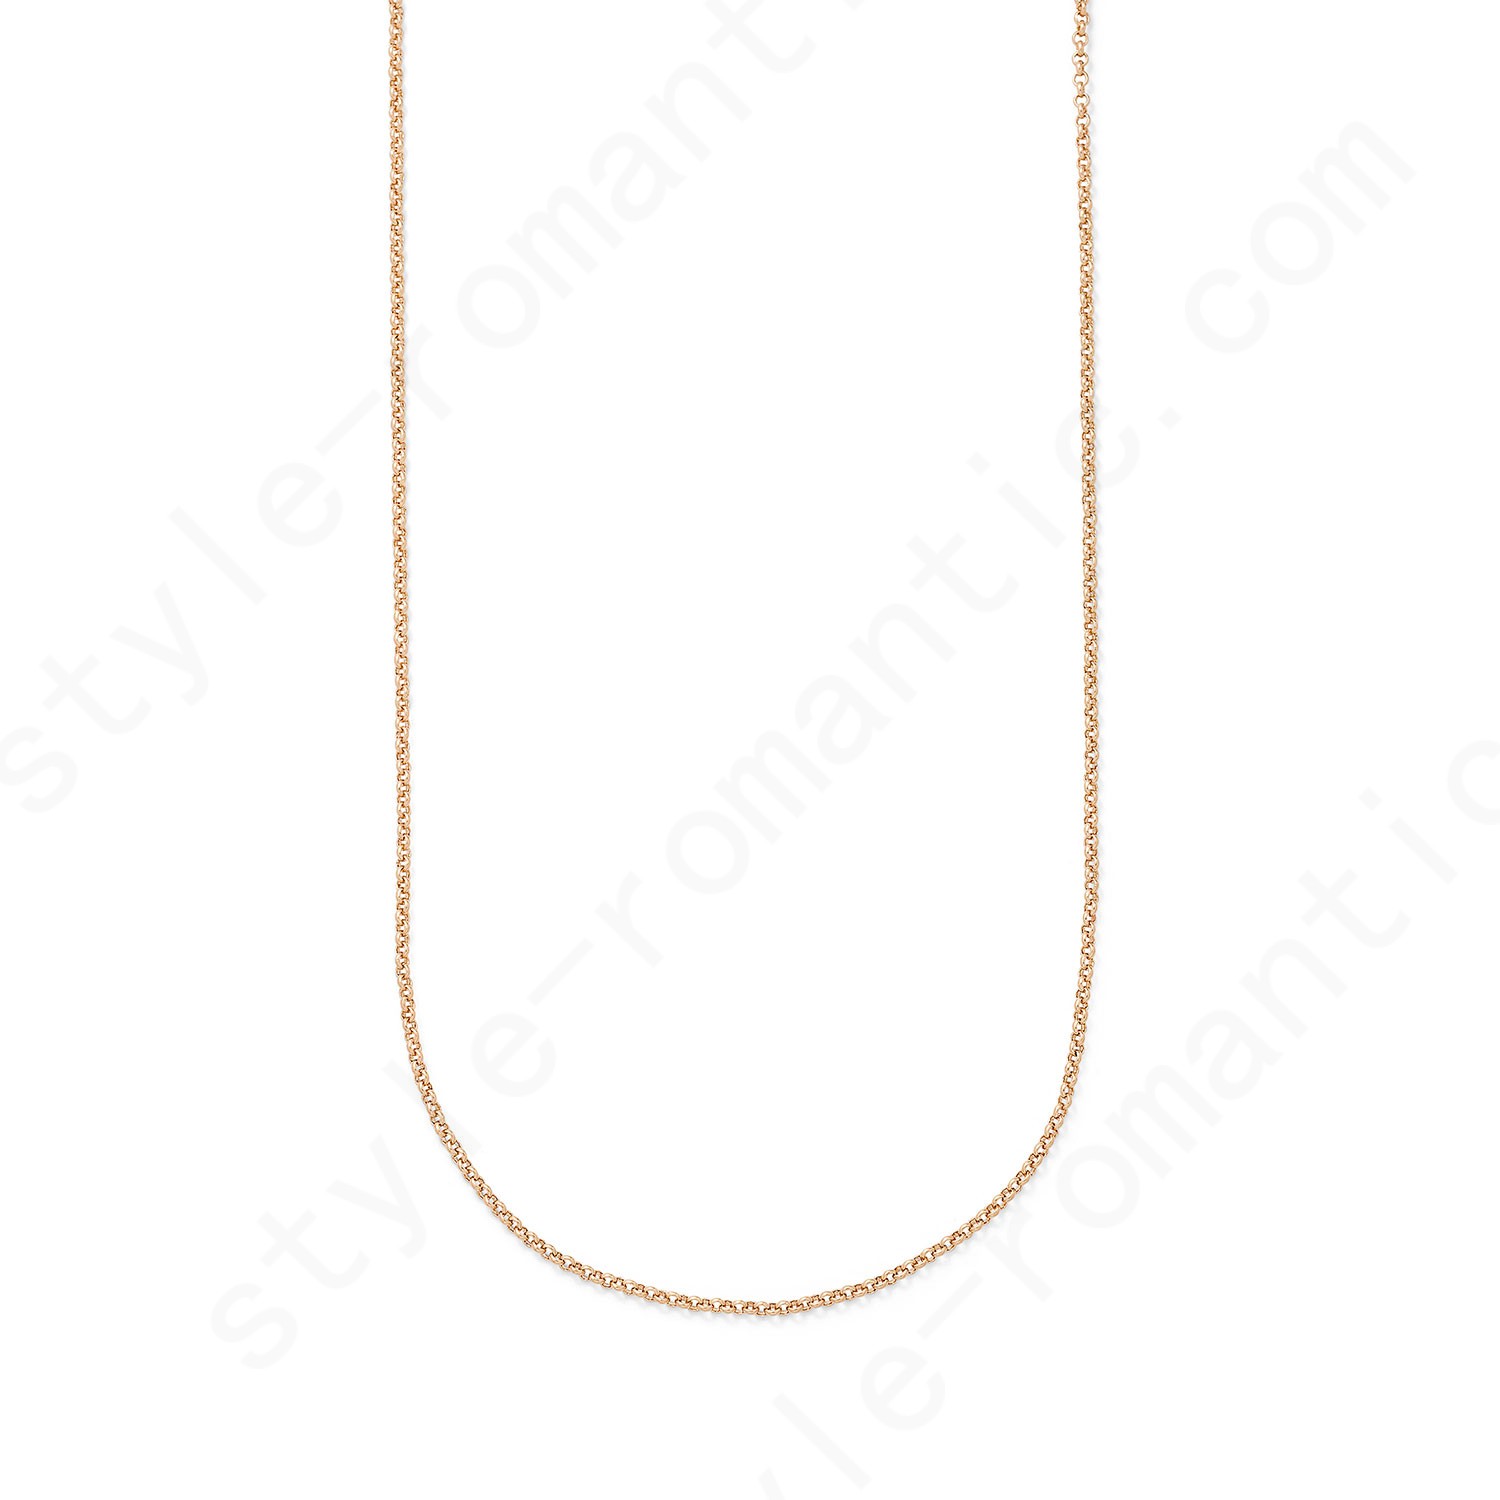 Thirty-One Gifts Dainty Rolo Chain - Inch - Gold Tone - Thirty-One Gifts Dainty Rolo Chain - Inch - Gold Tone